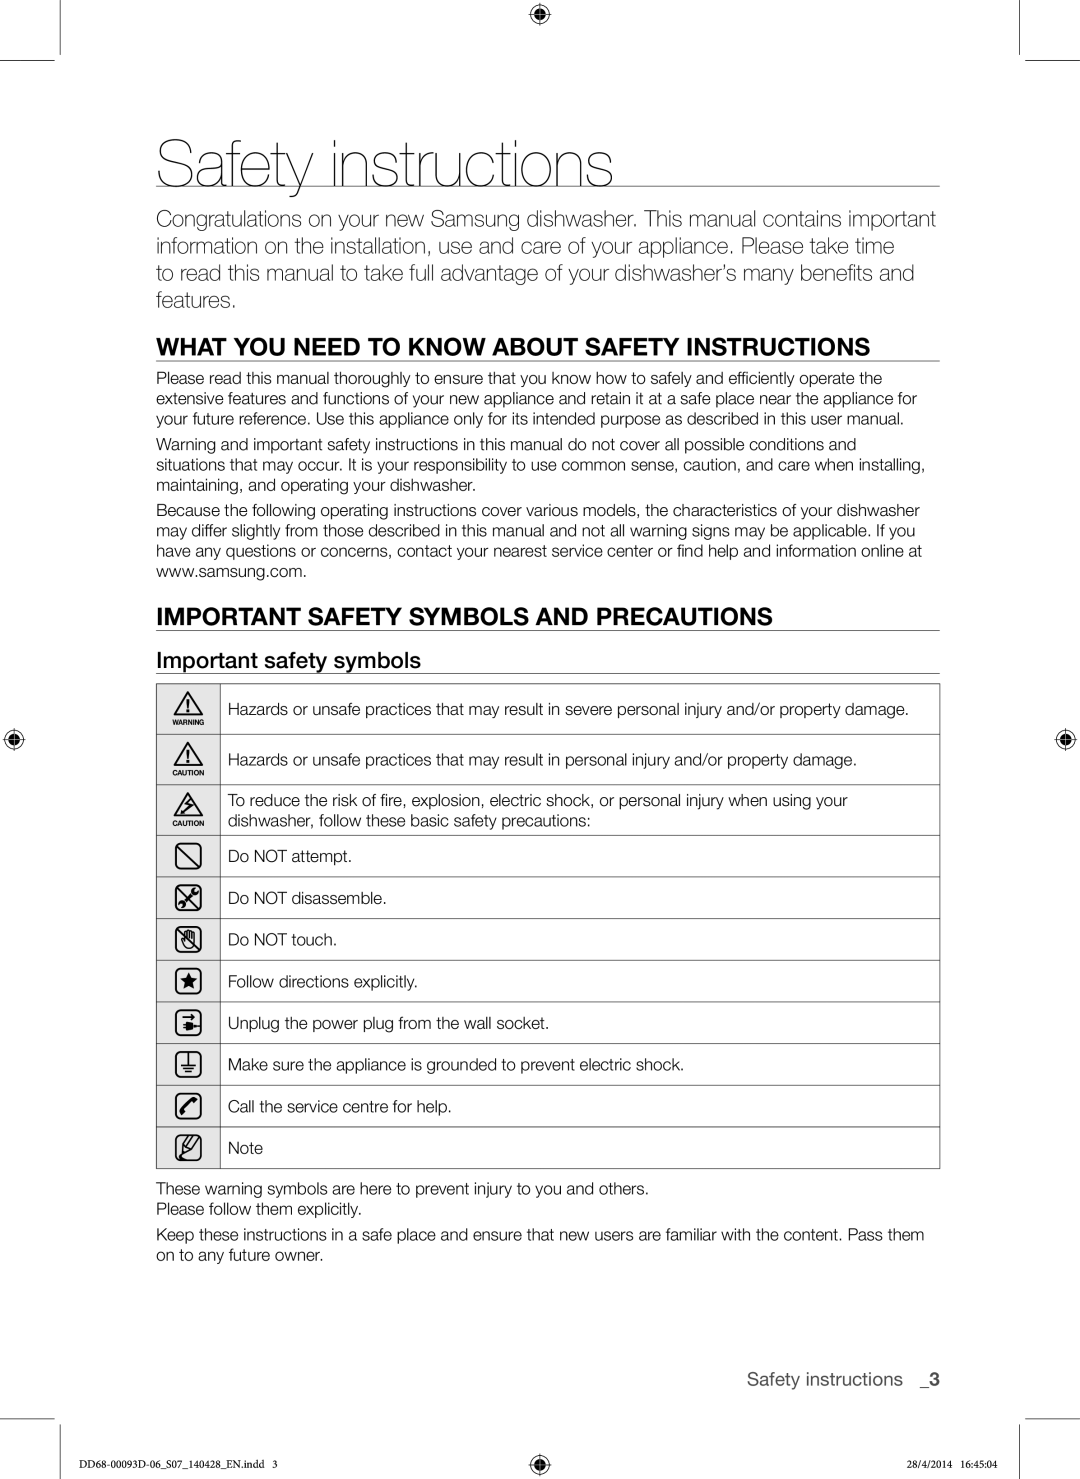 Samsung DW60H700FEA/TR Safety instructions, What You Need To Know About Safety Instructions, Important safety symbols 